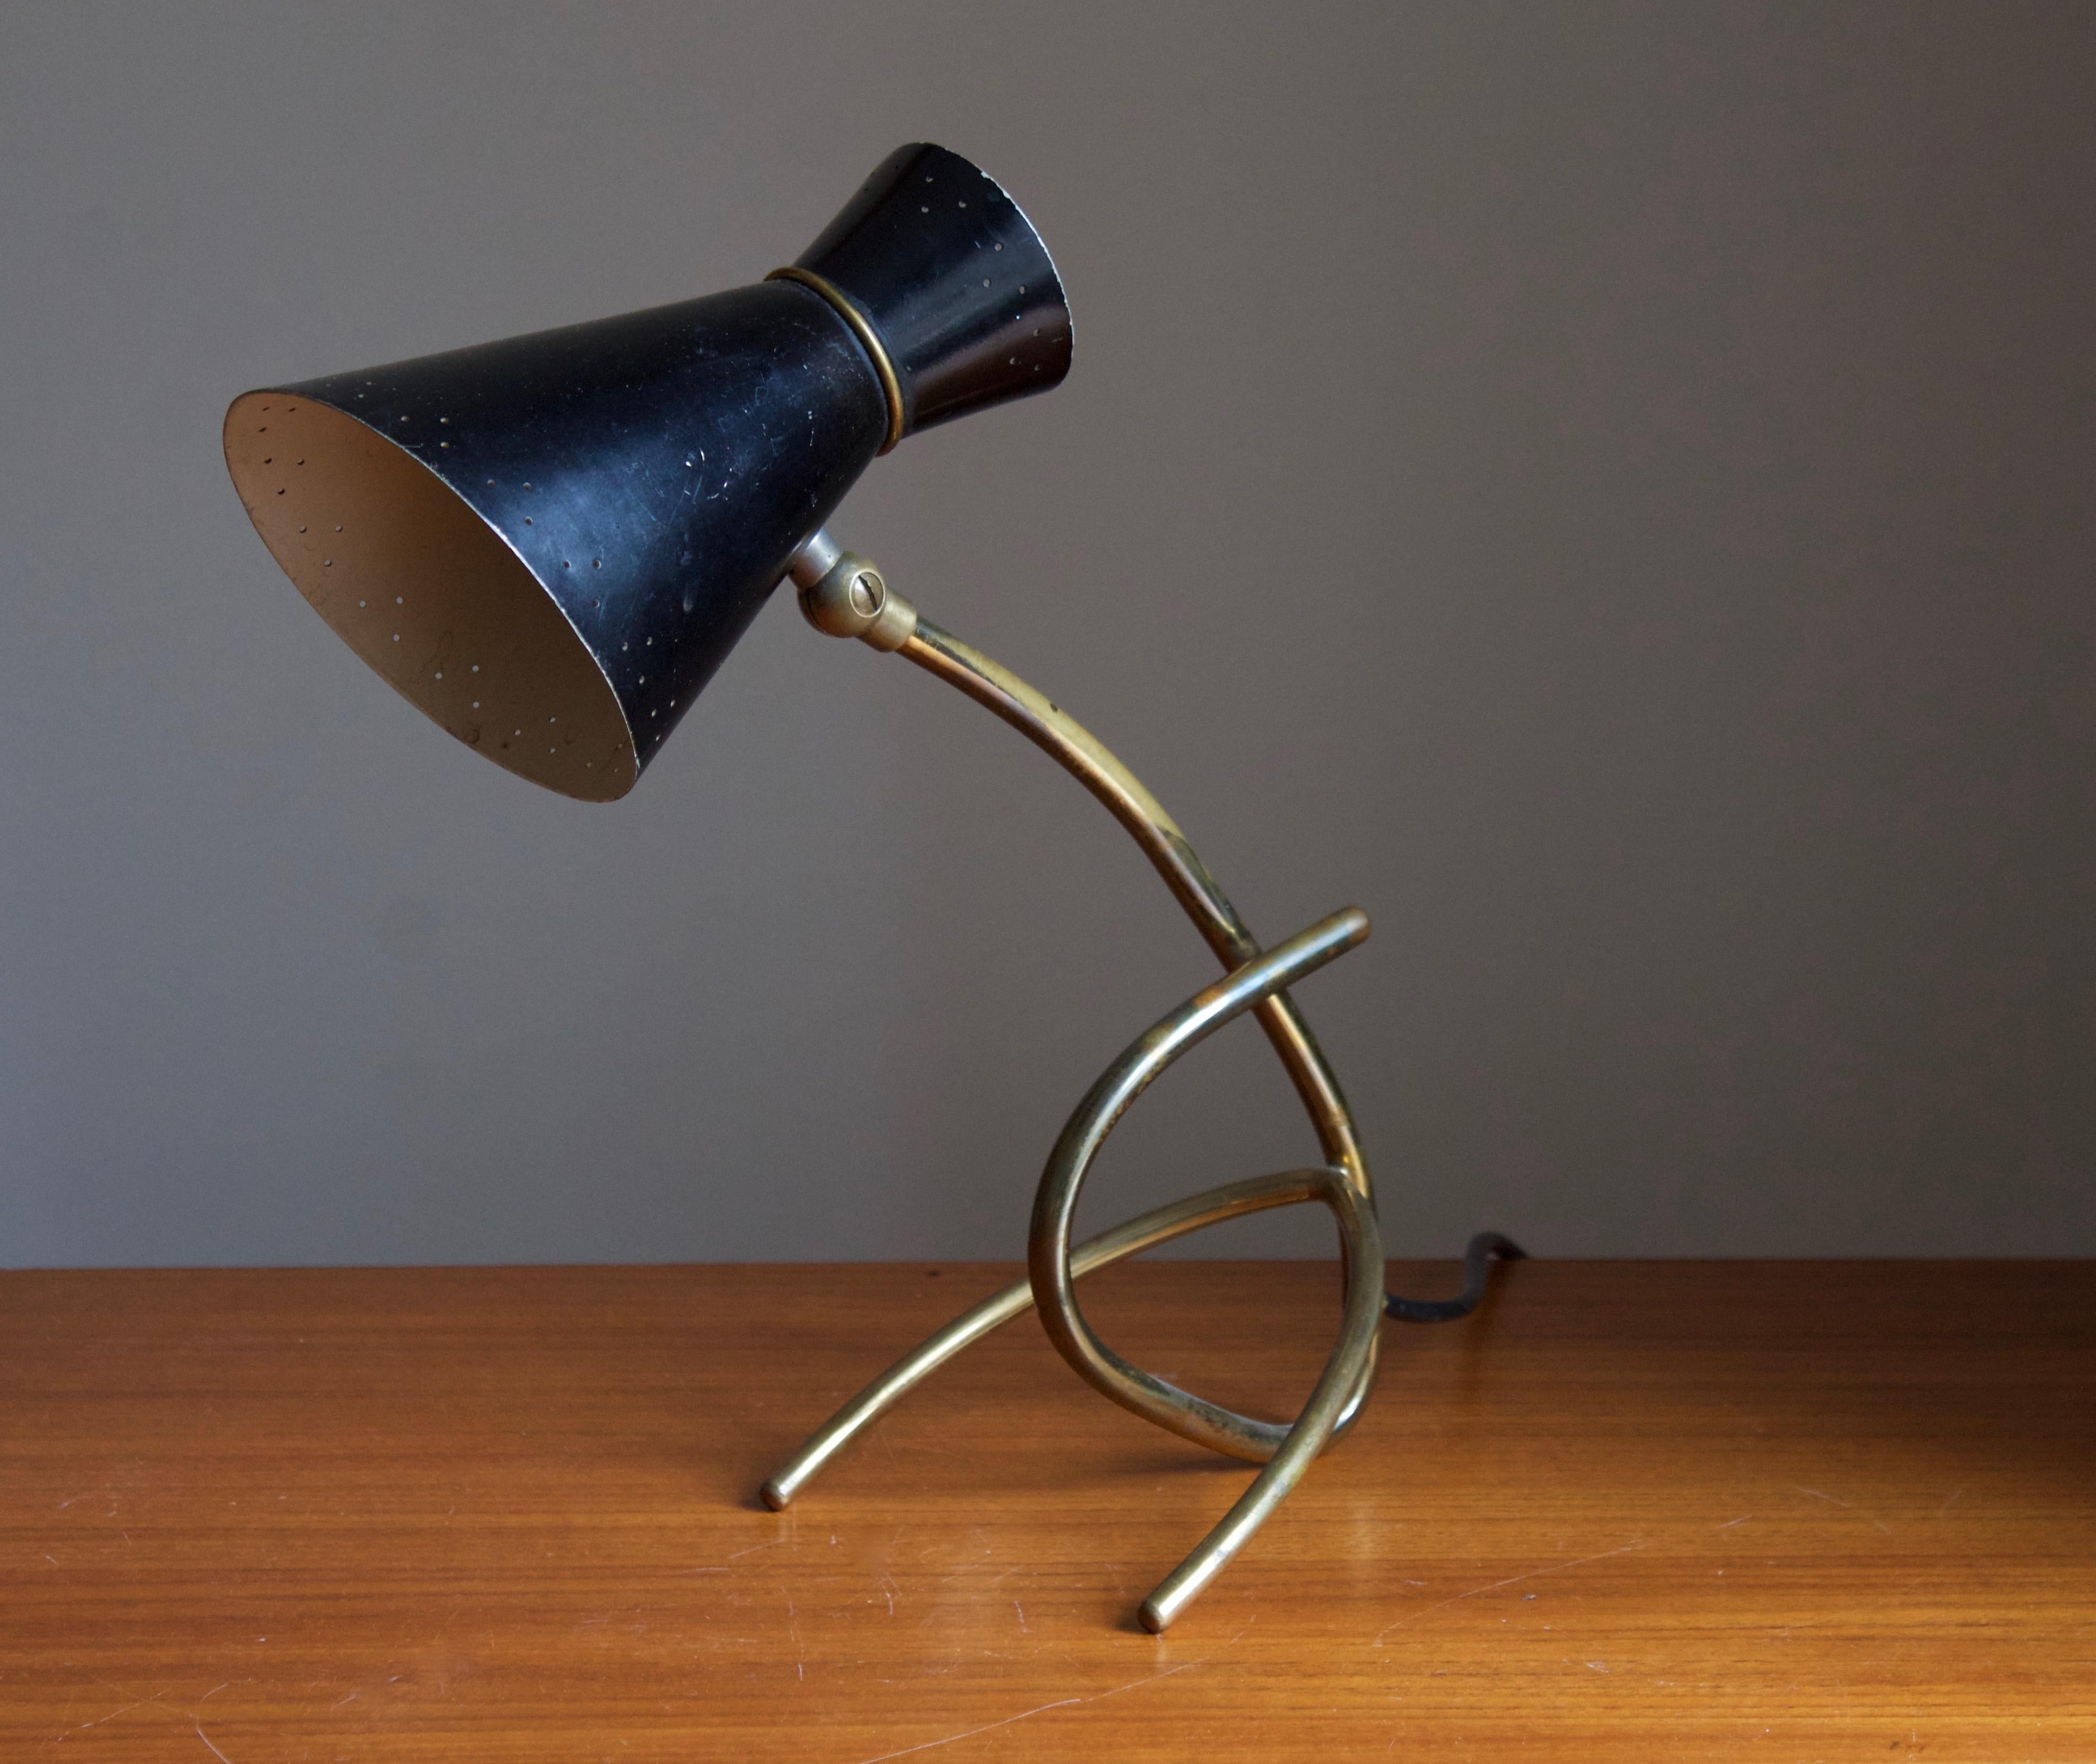 A table lamp / desk light, design is attributed to Svend Aage Holm Sørensen, Denmark, 1950s. Adjustable screen, original black lacquer. 

Other designers of the period include Paavo Tynell, Serge Mouille, Josef Frank, Angelo Lelii, and Lisa